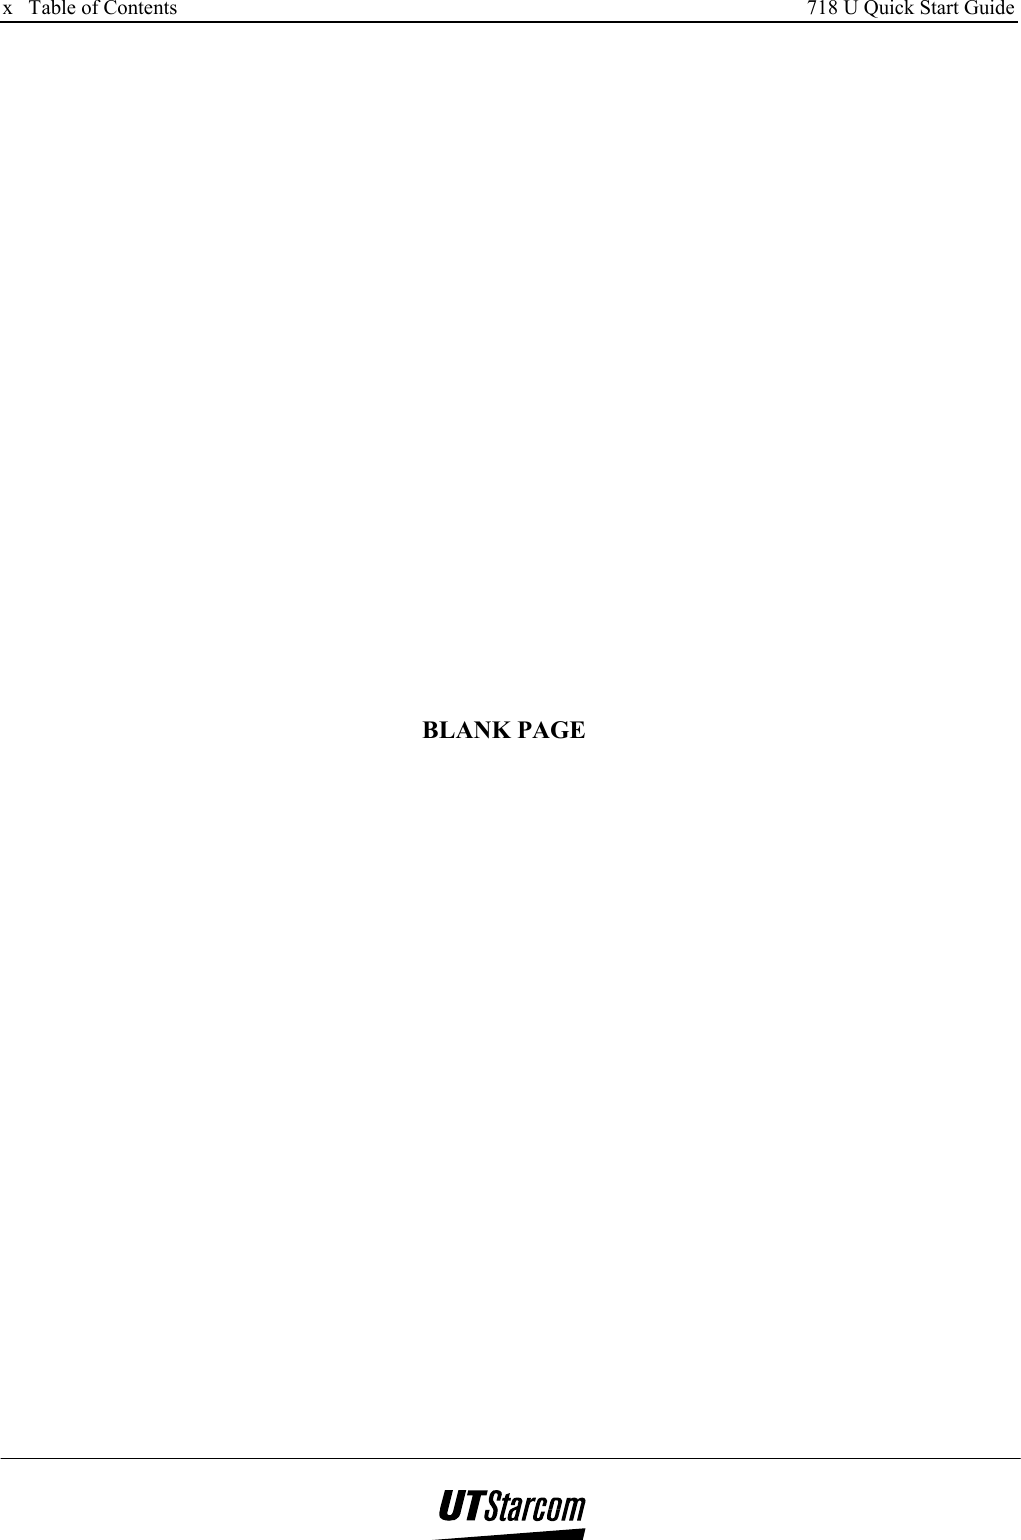 x   Table of Contents     718 U Quick Start Guide                  BLANK PAGE 